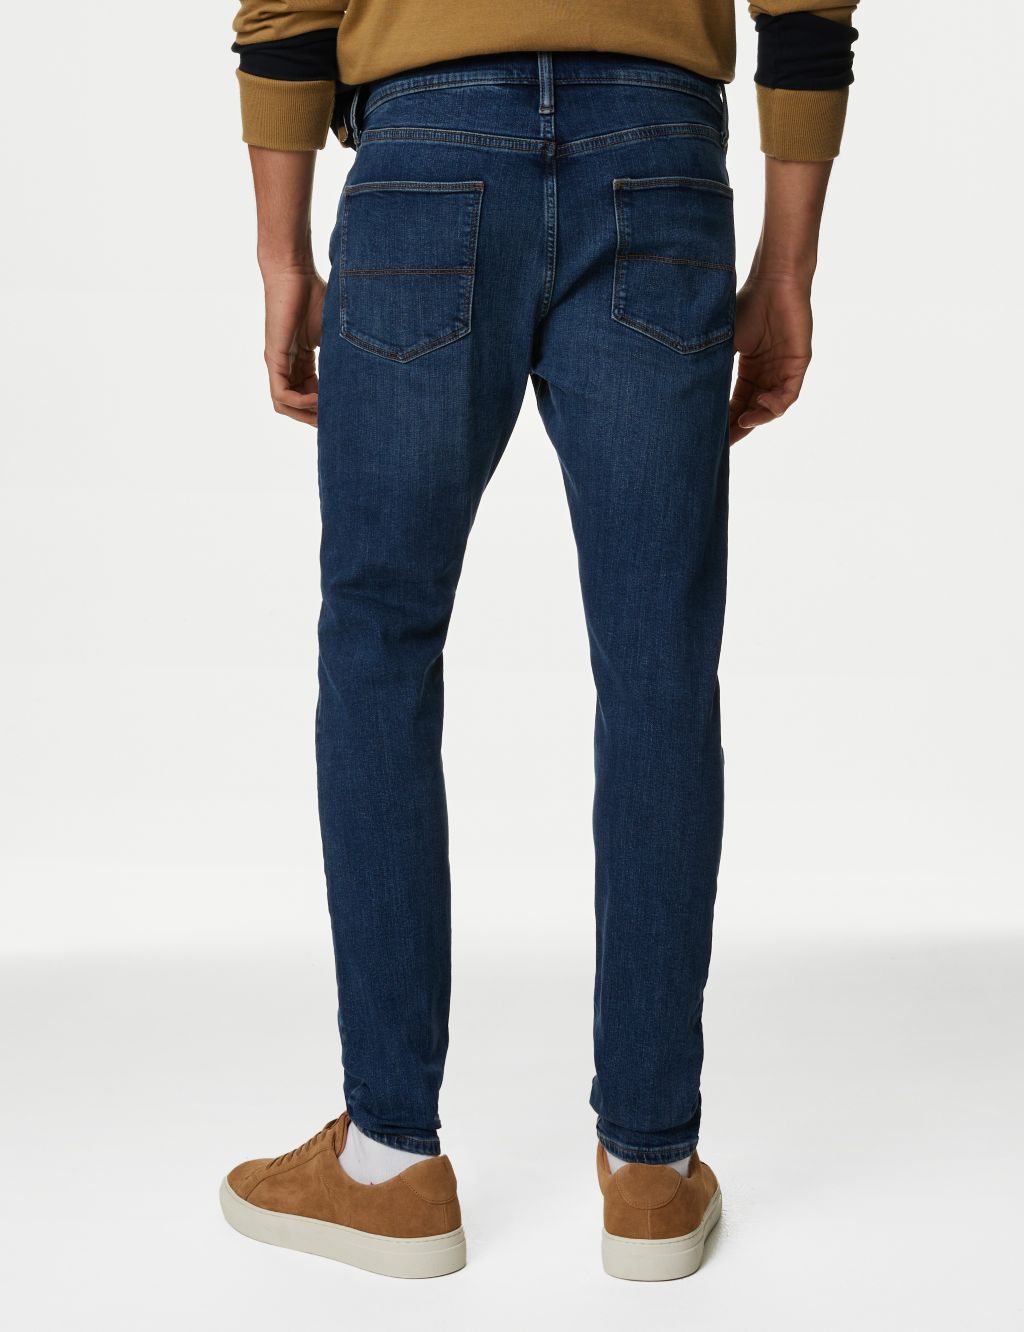 Skinny Fit Stretch Jeans image 4